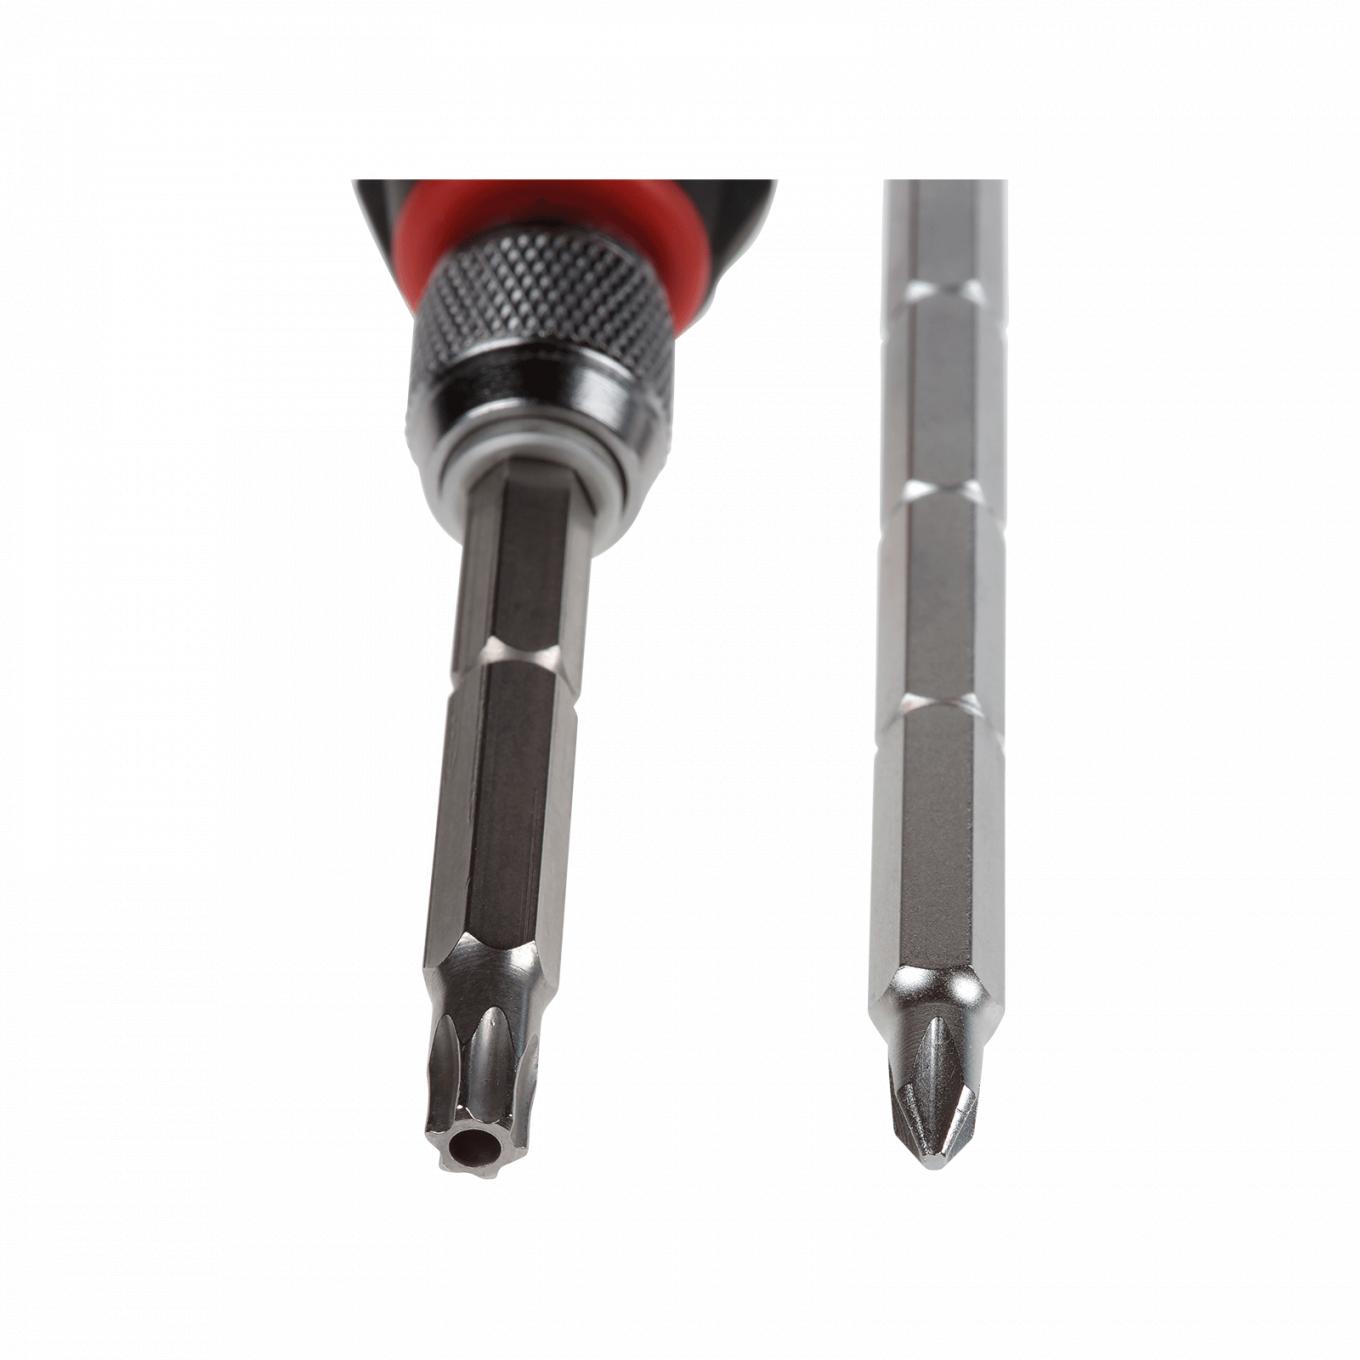 AXIS 4-in-1 Security Screwdriver Kit 클로즈업 헤드